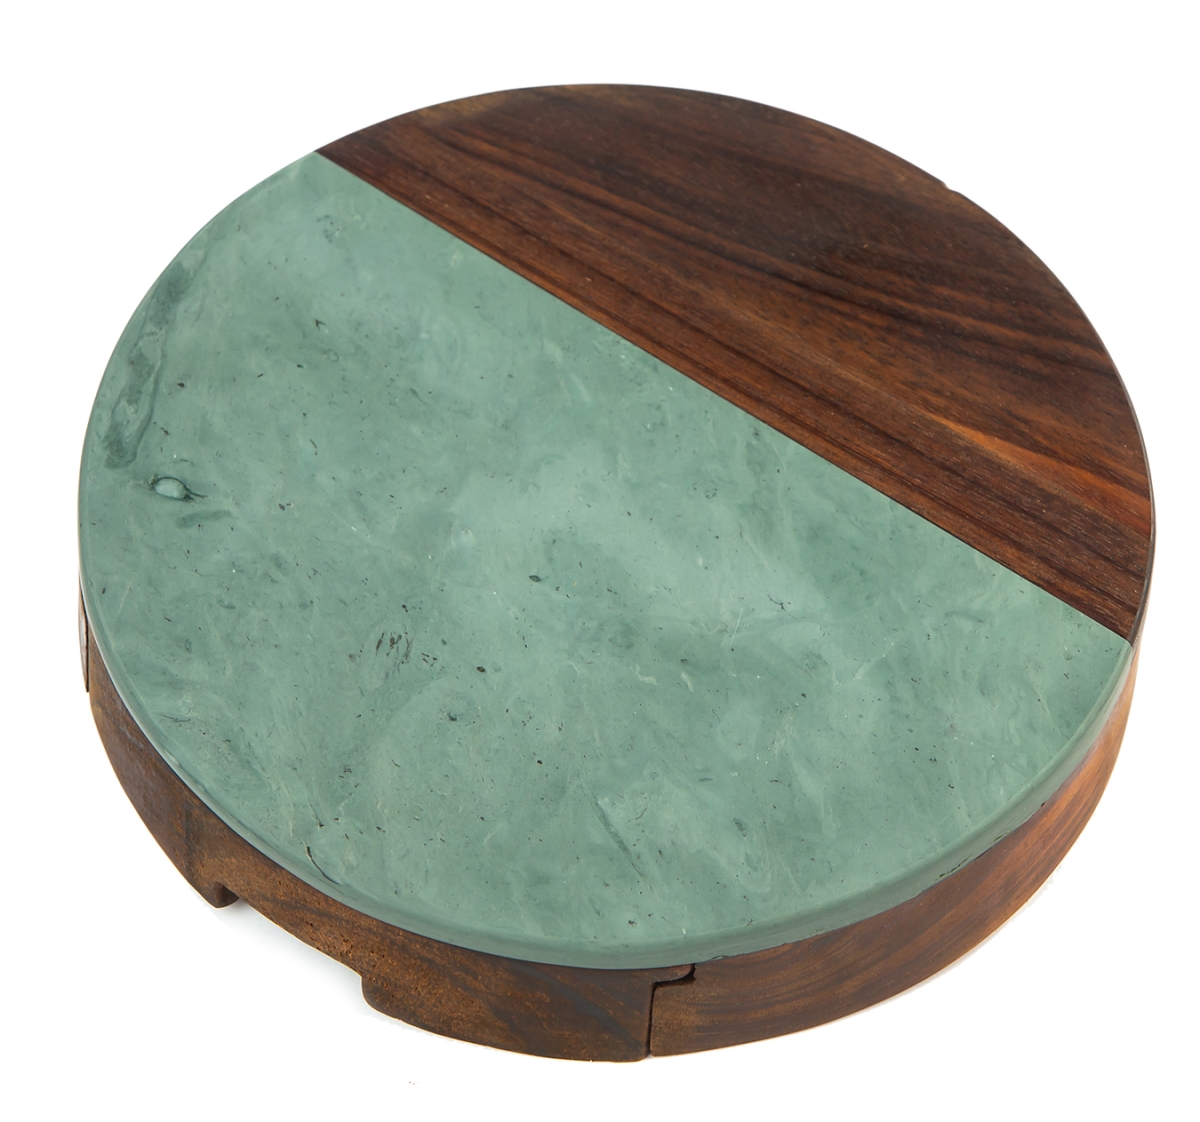 Psm-559gr Winslow Marble Cheese Tray - Green